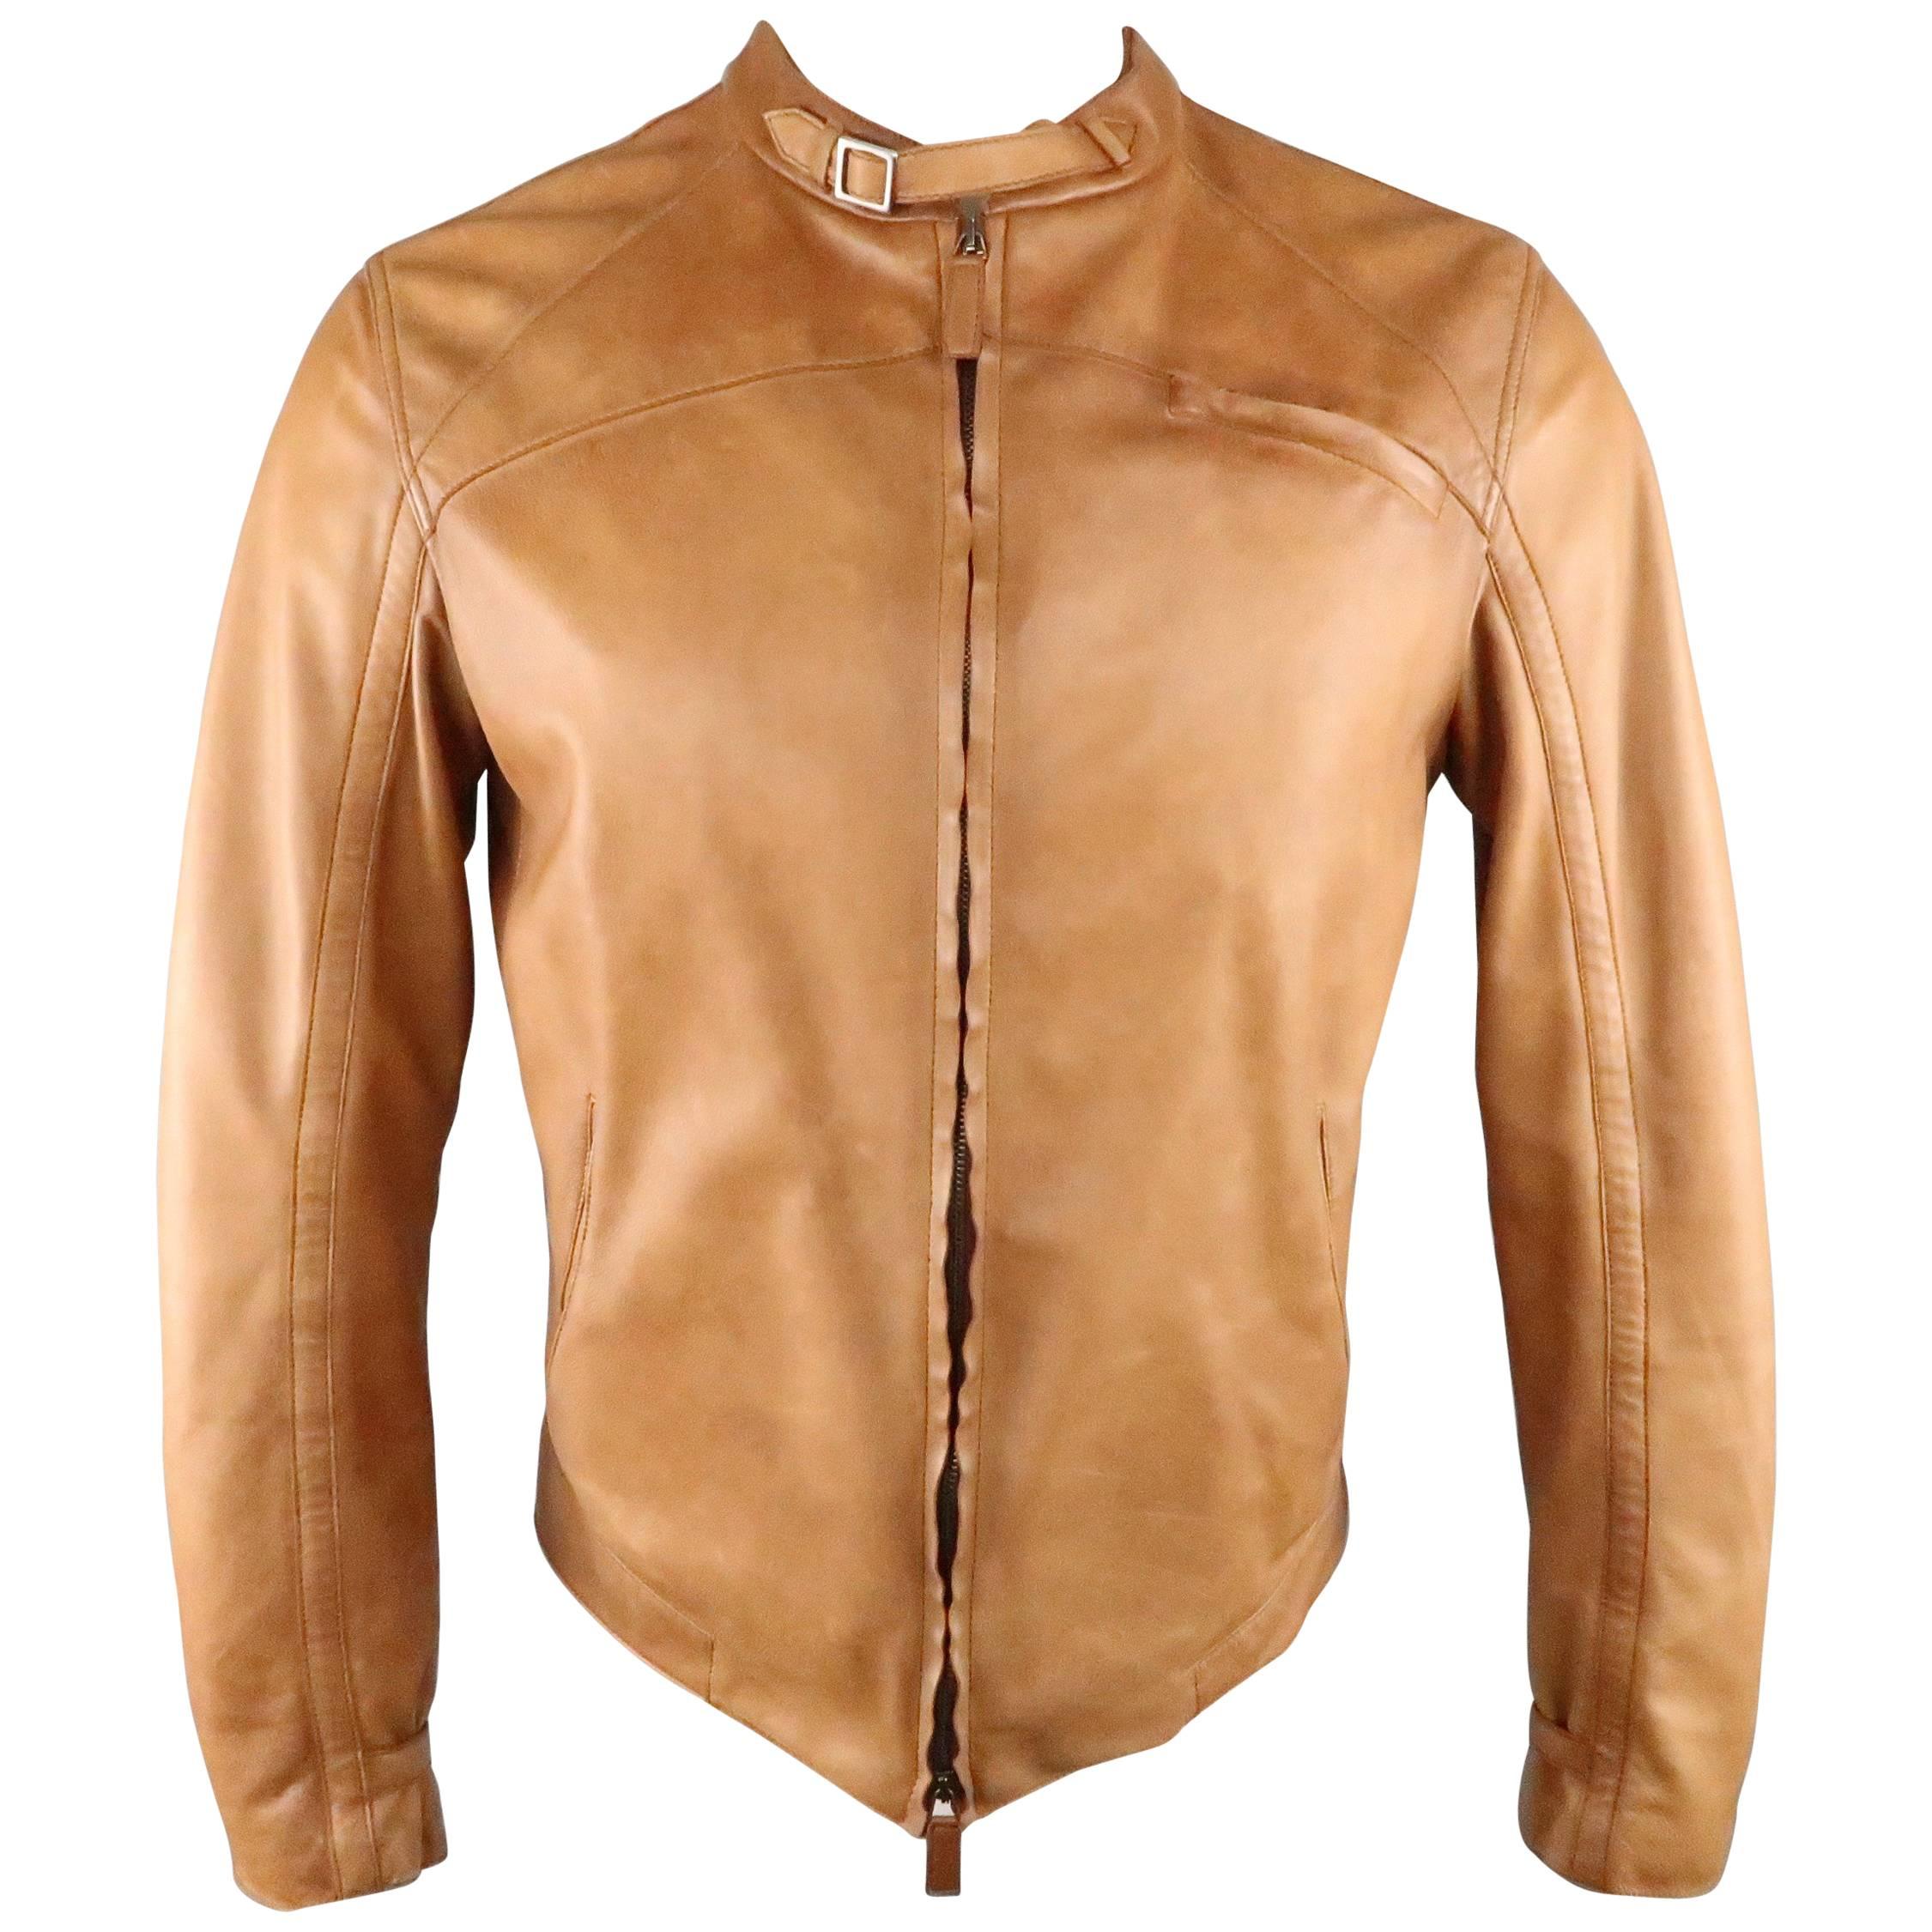 Men's EMPORIO ARMANI 40 Tan Distressed Leathe Belted Collar Motorcycle Jacket